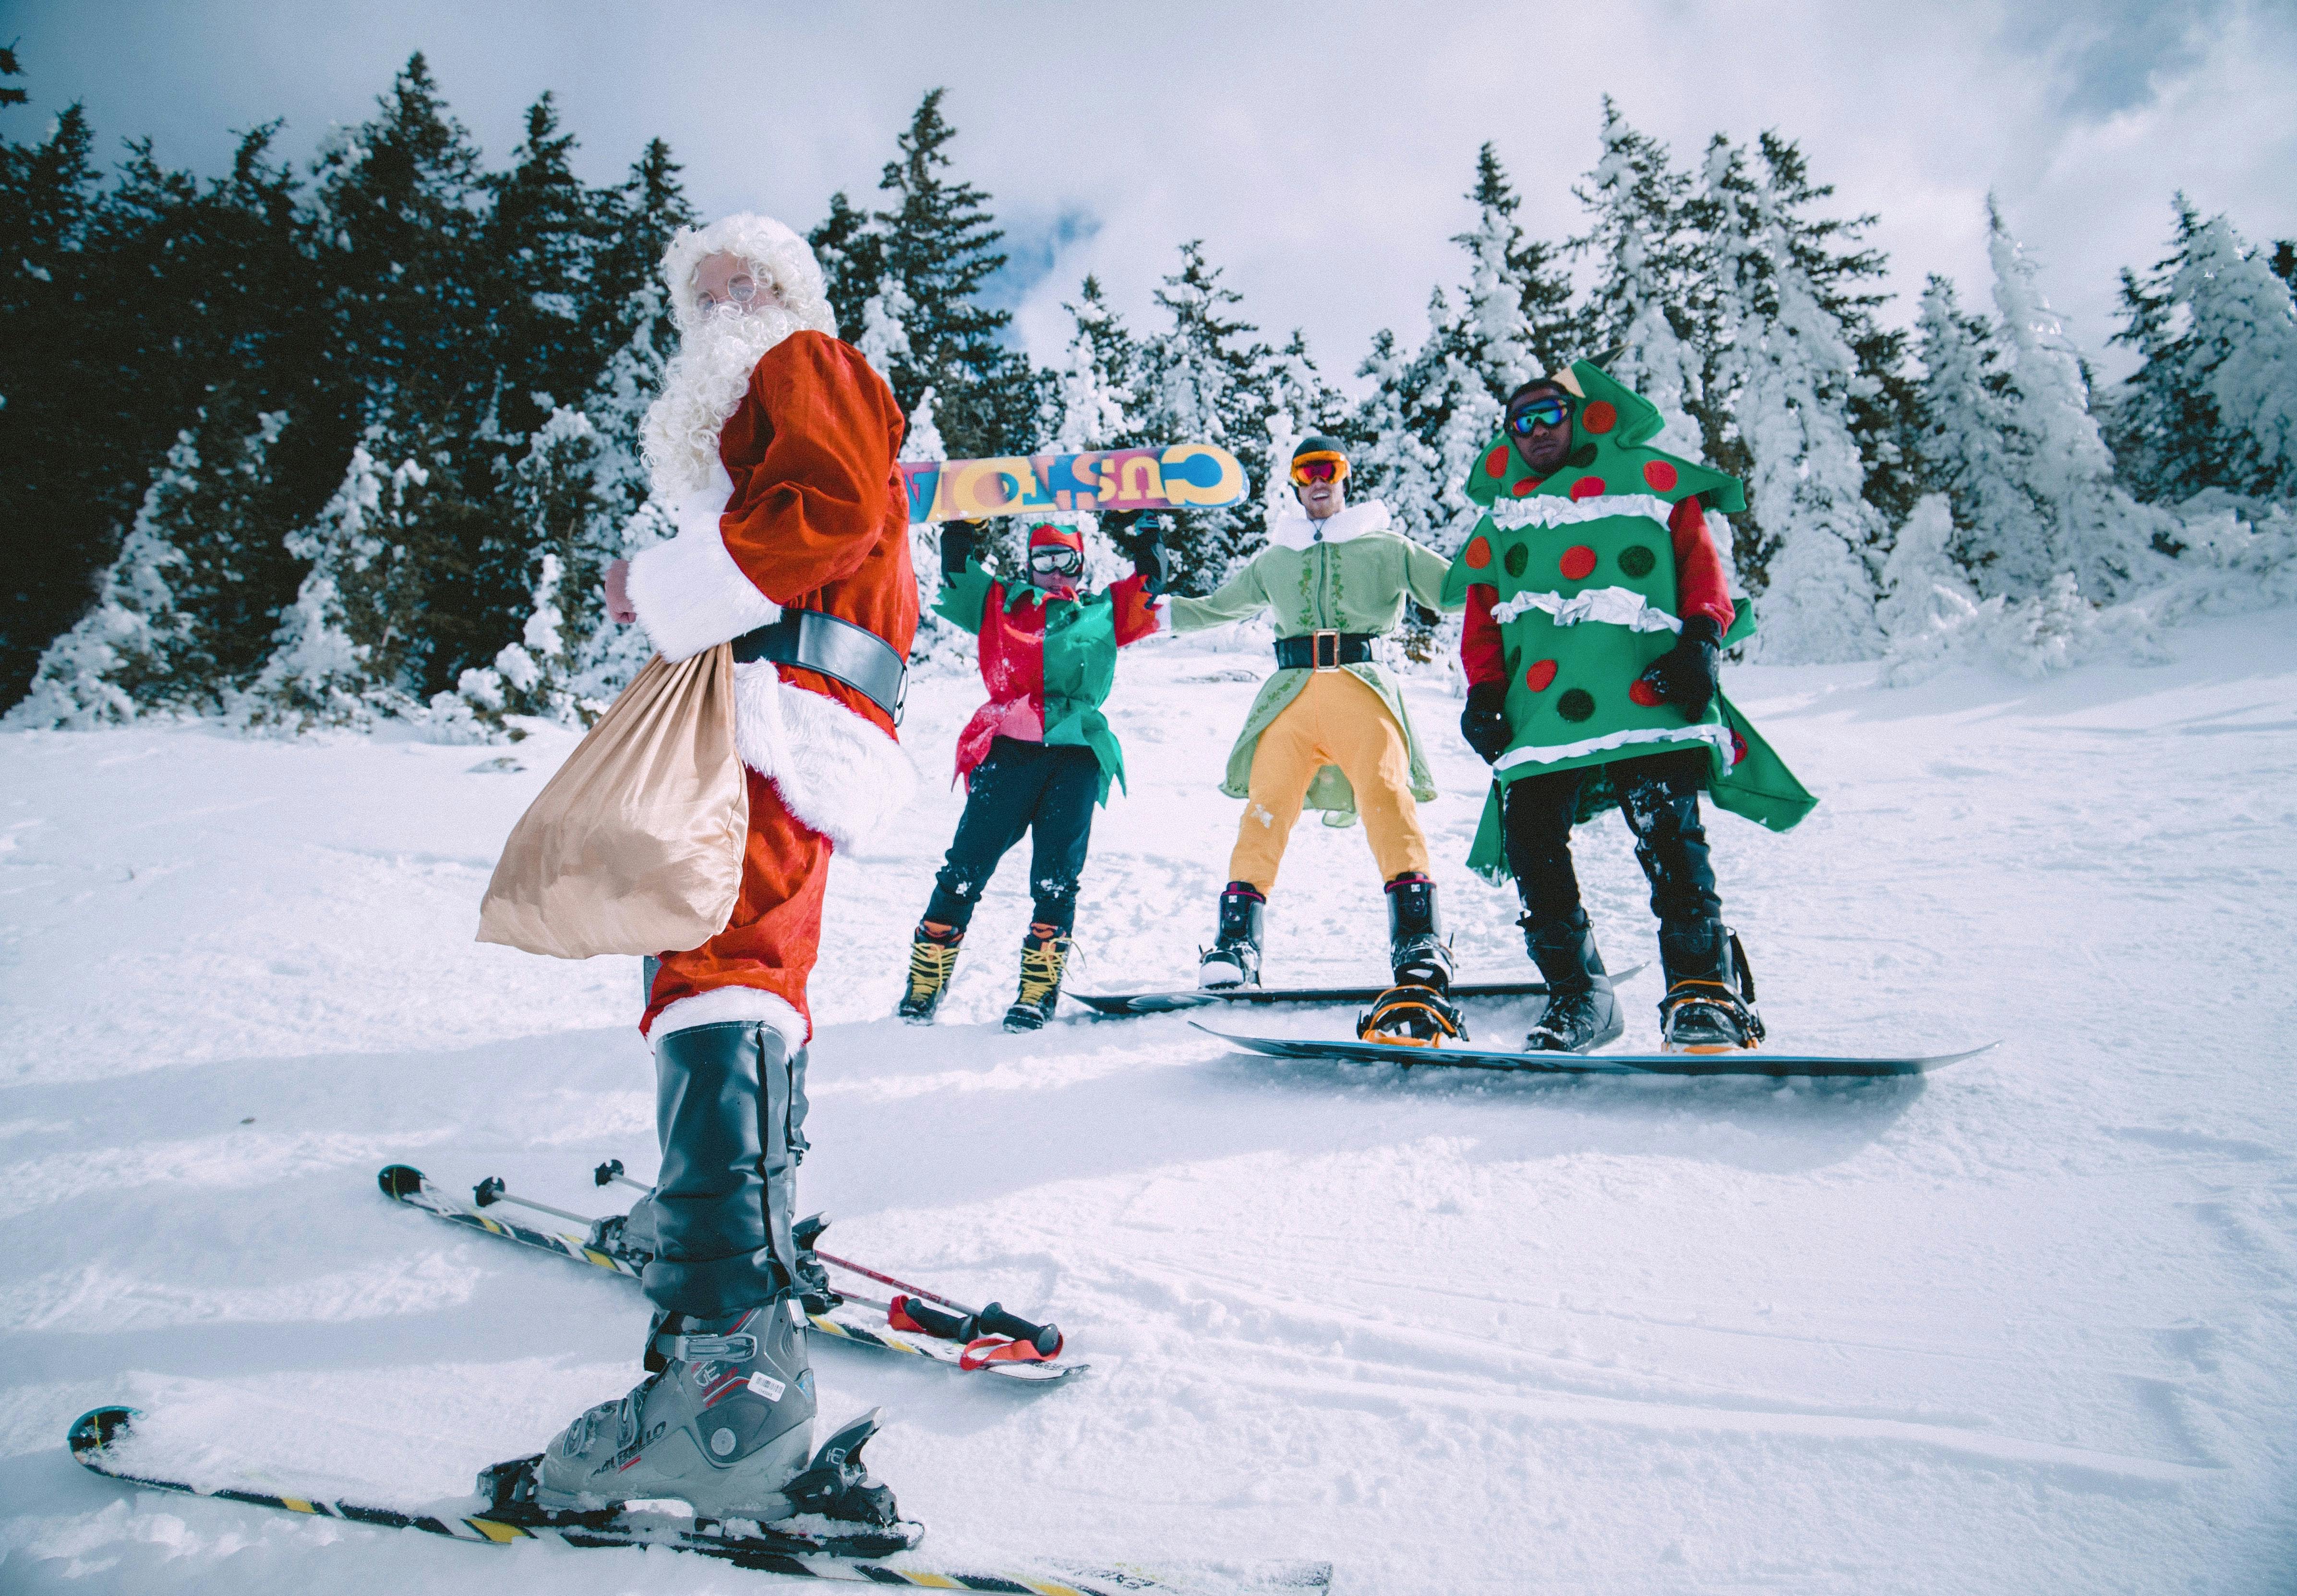 A group of skiers and snowboarders stand together wearing Christmas costumes, including Santa, an elf, and a Christmas tree